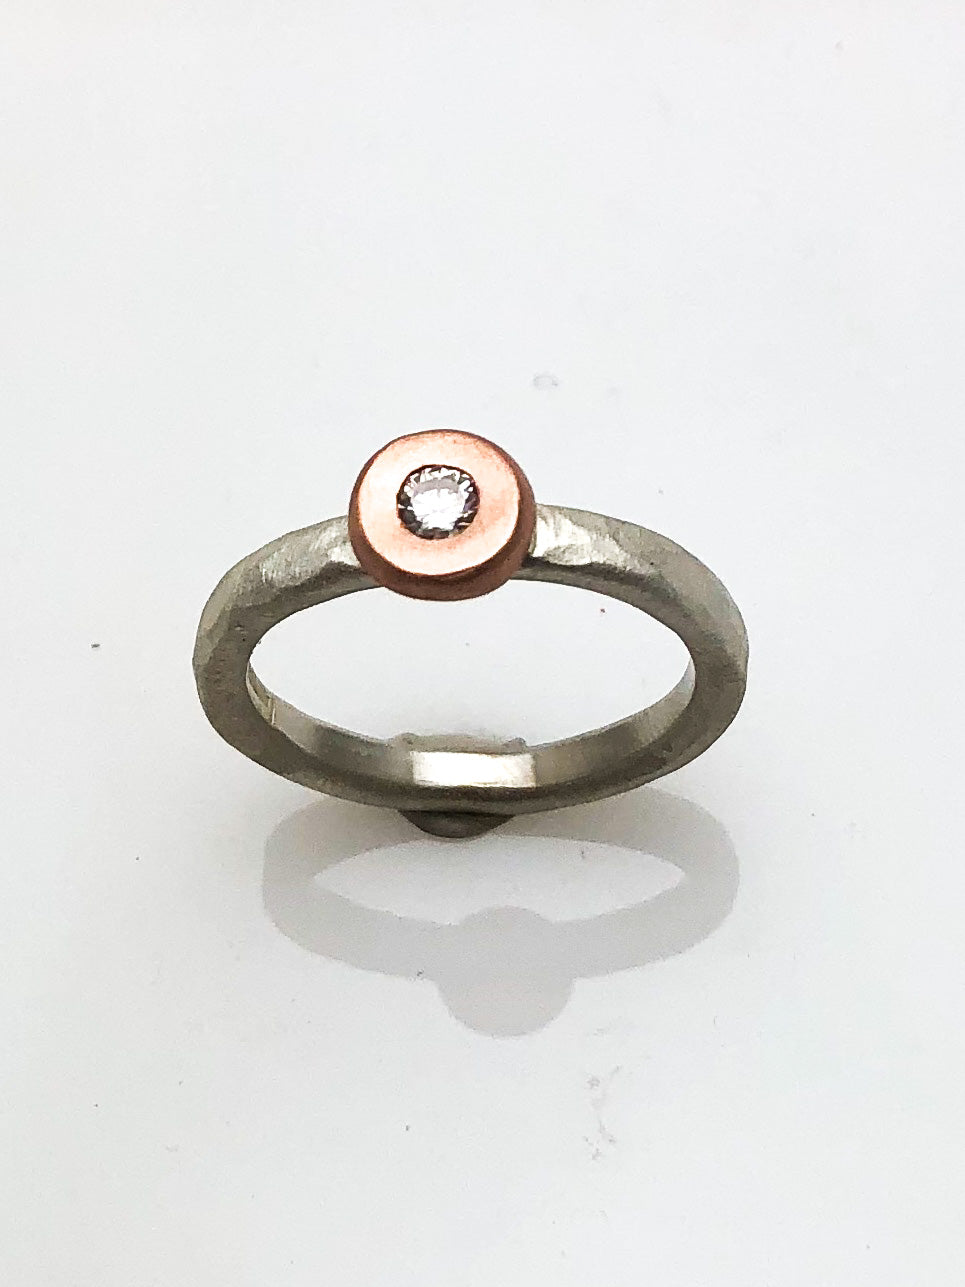 STERLING SILVER/14K ROSE GOLD AND DIAMOND STACK RING